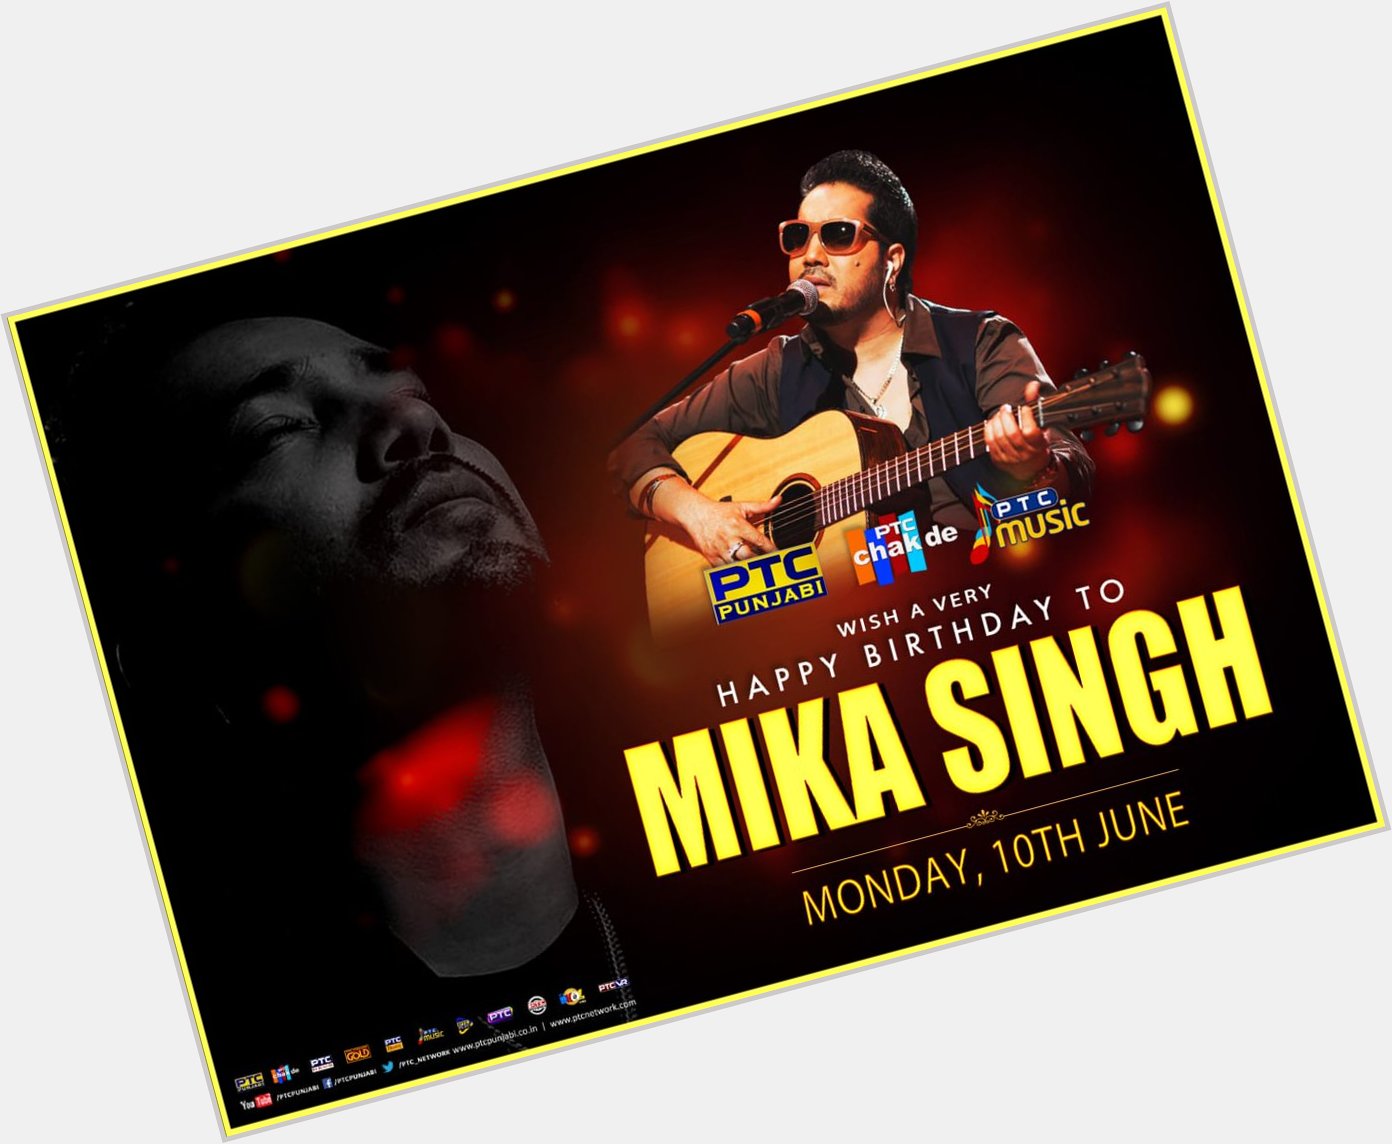 PTC Network wishes Mika Singh very happy birthday and a great life ahead.   